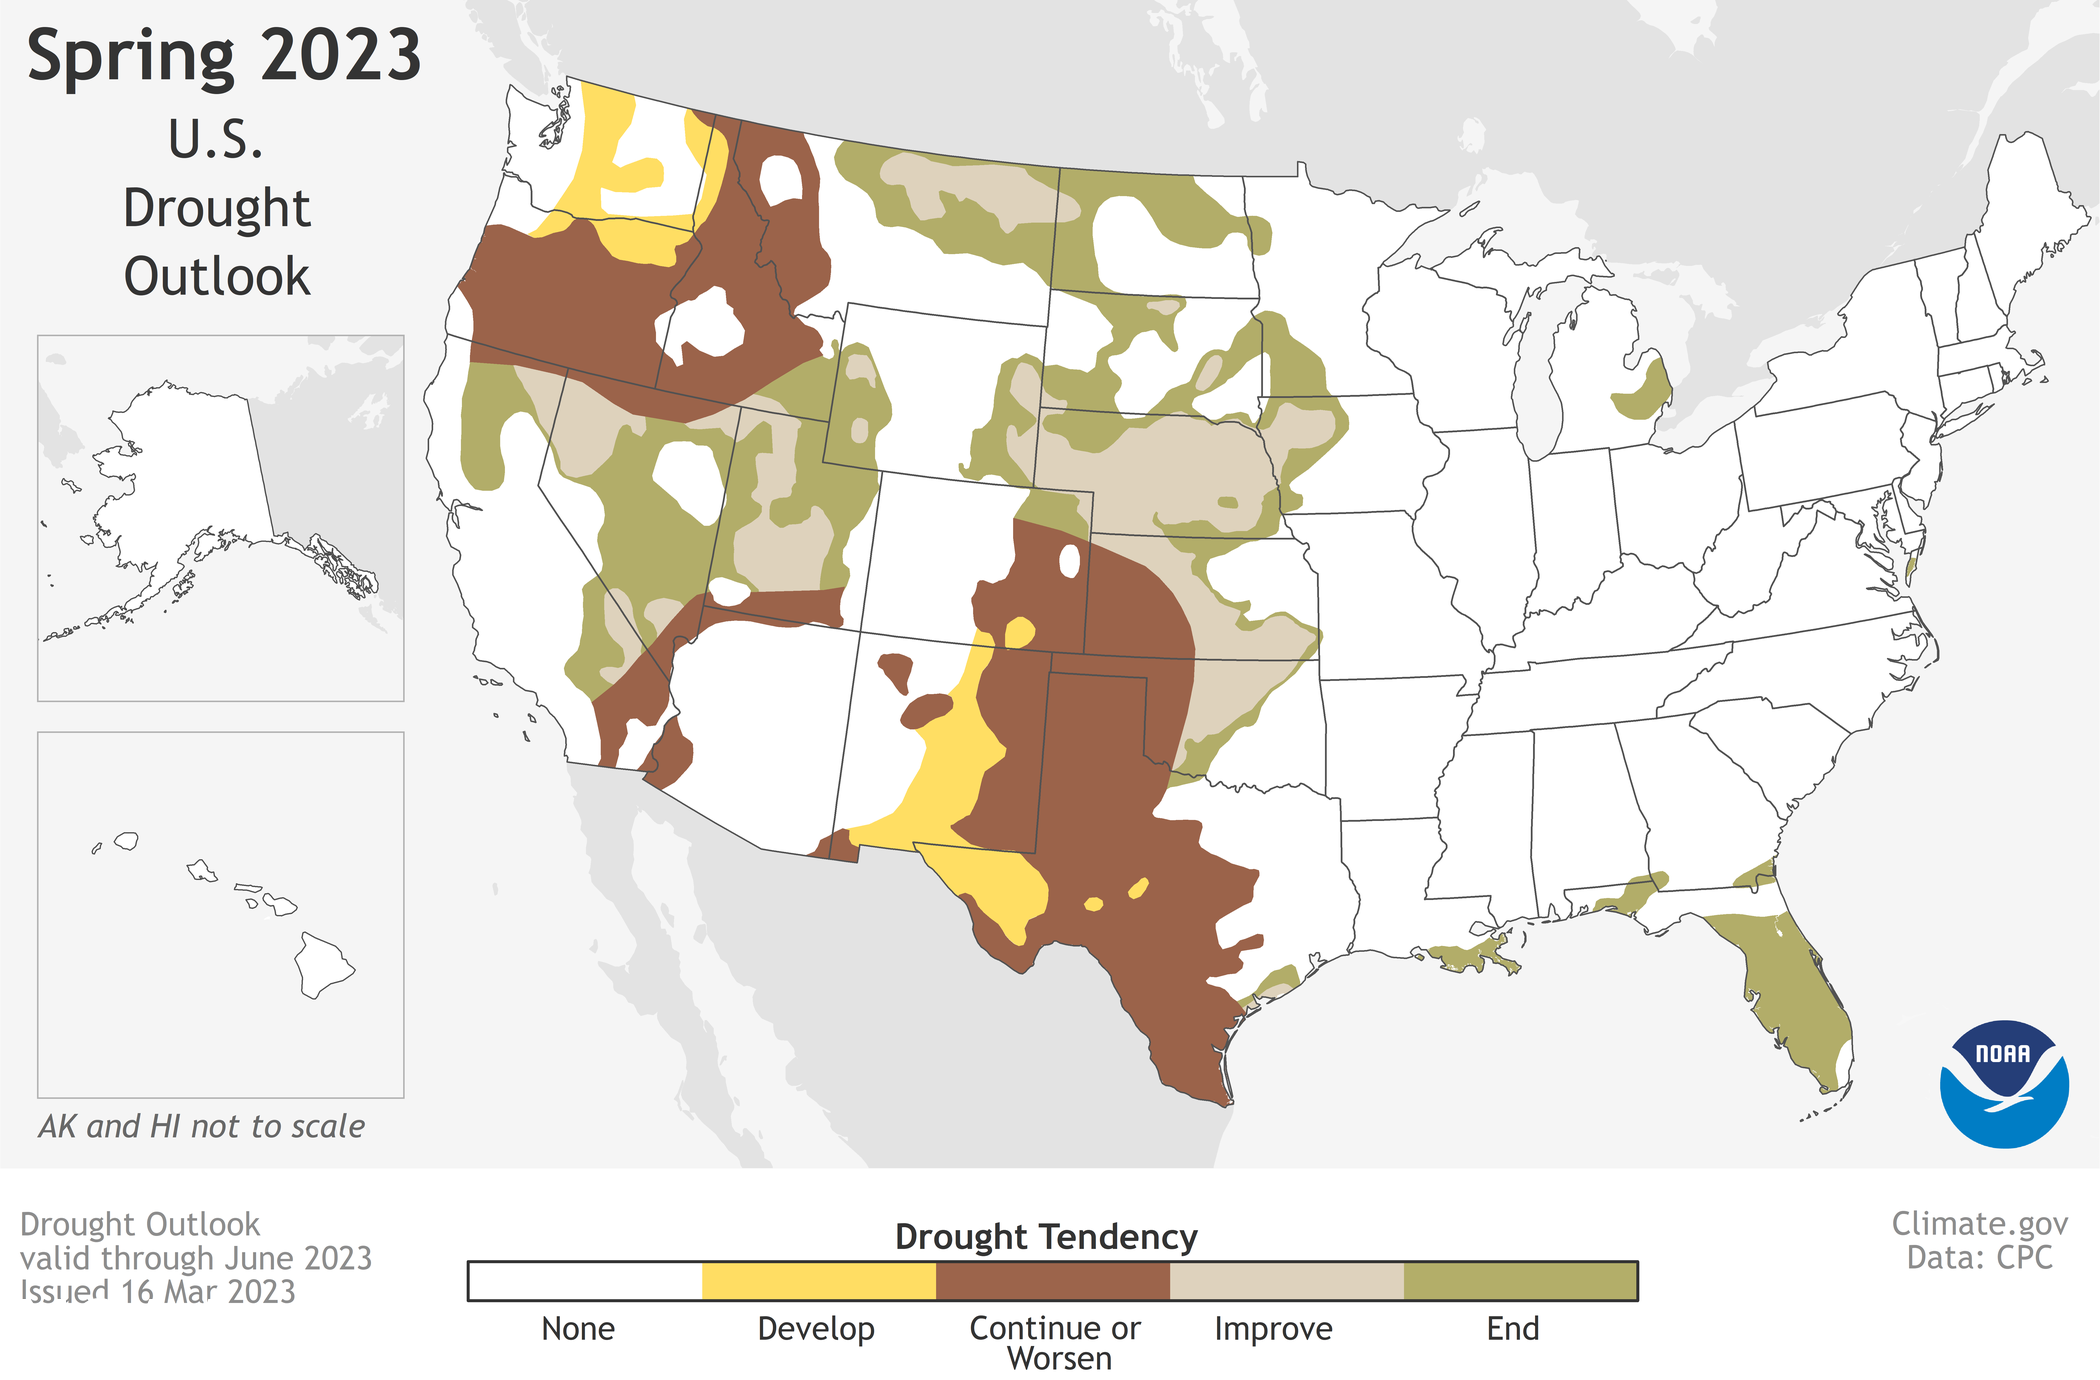 This map depicts where there is a greater than 50% chance of drought persistence, development, or improvement based on short- and long-range statistical and dynamical forecasts during March 16 through June 30, 2023.